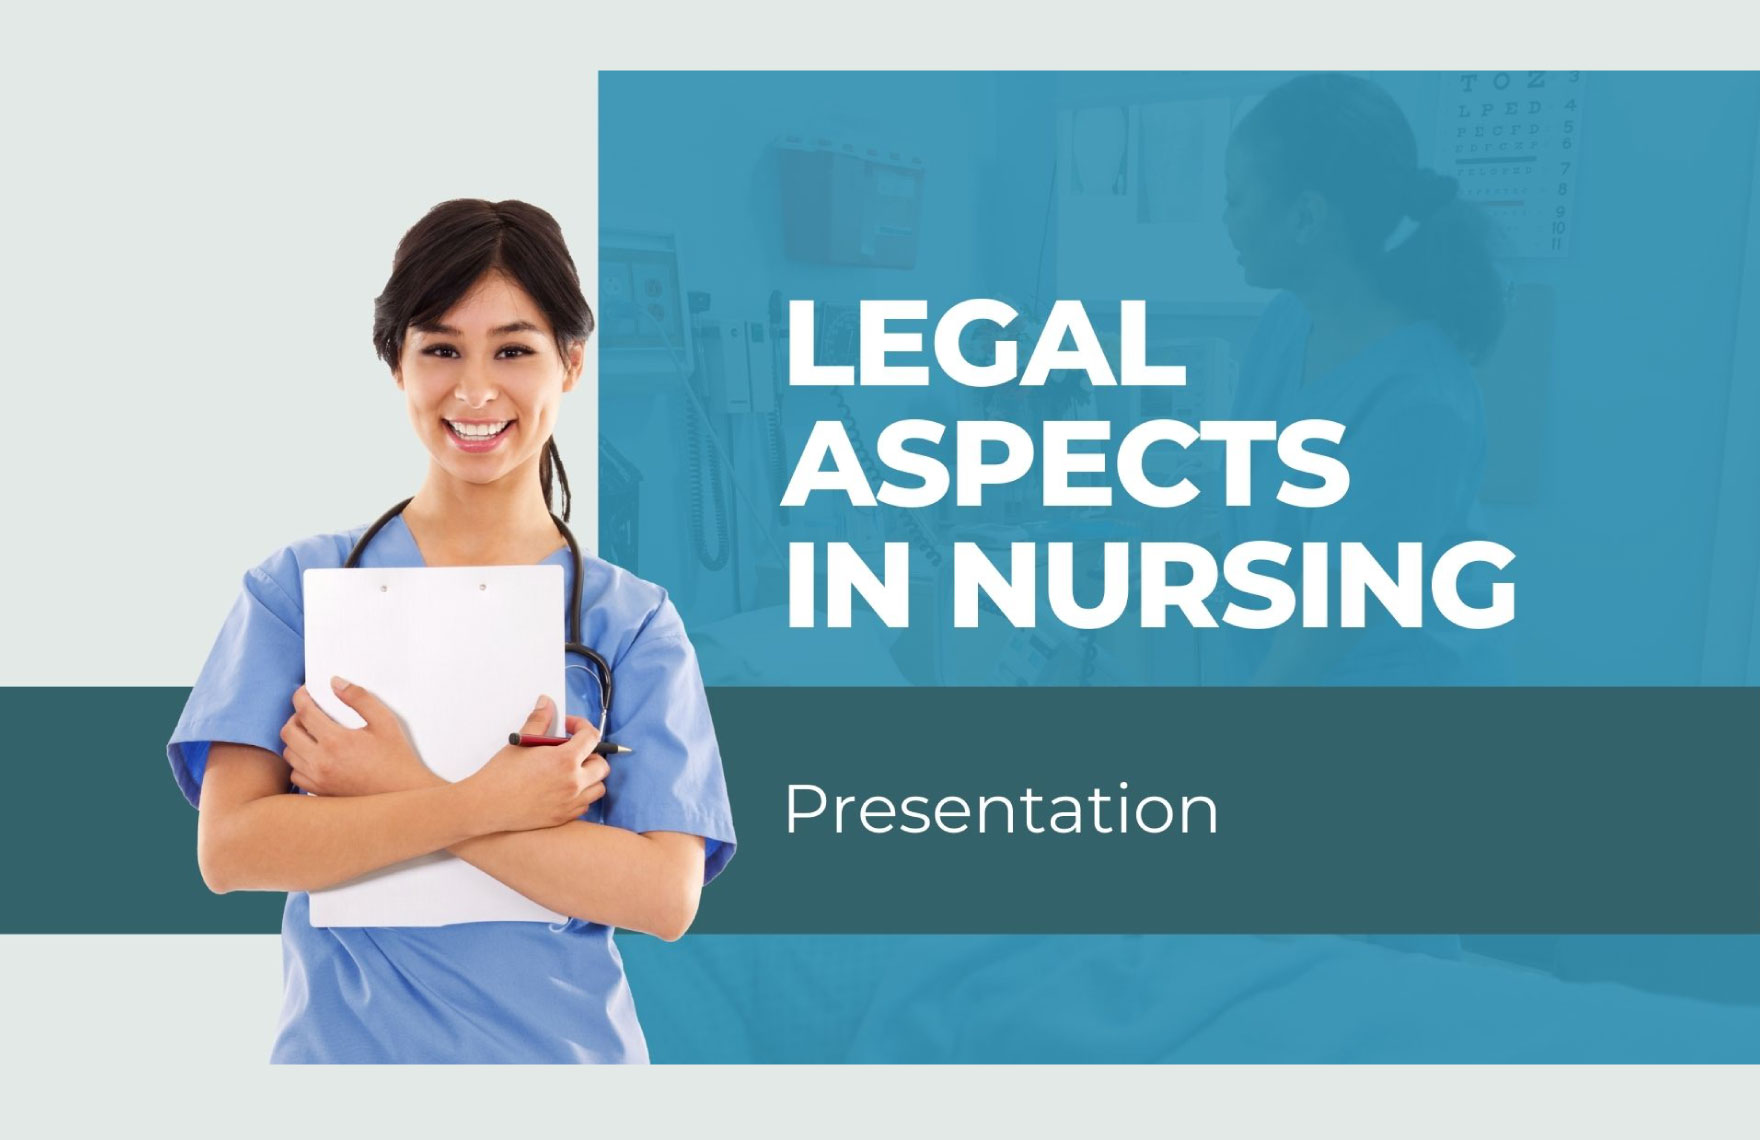 Legal Aspects in Nursing Template